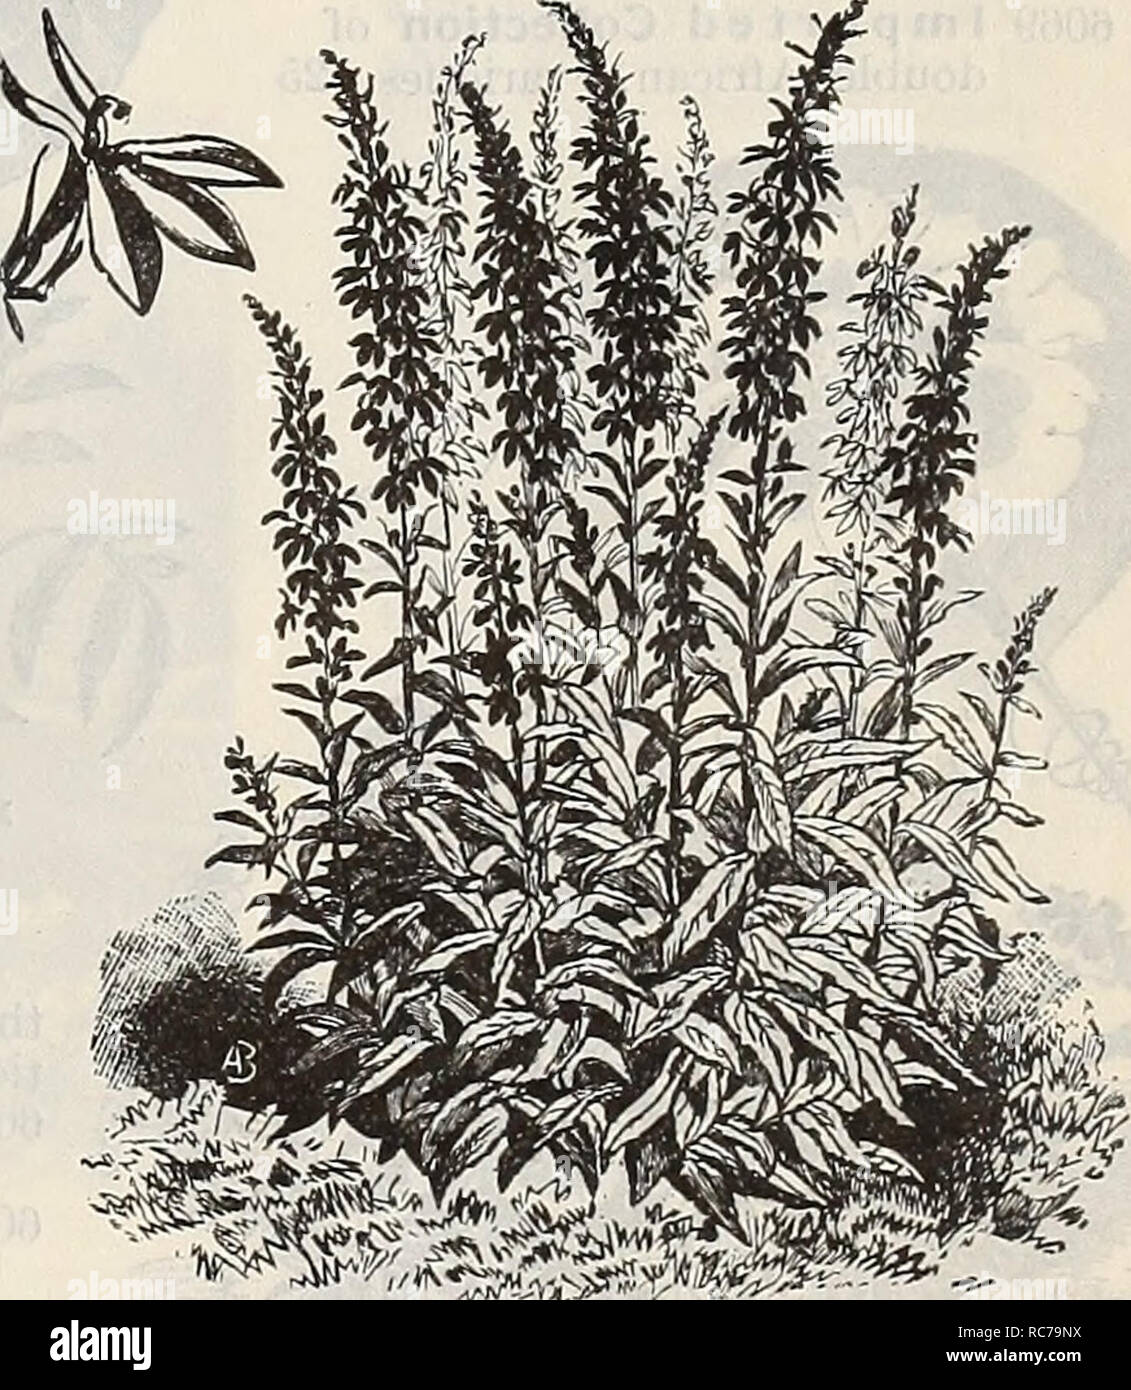 . Dreer's garden calendar : 1897. Seeds Catalogs; Nursery stock Catalogs; Gardening Equipment and supplies Catalogs; Flowers Seeds Catalogs; Vegetables Seeds Catalogs; Fruit Seeds Catalogs. .Lobelia, Barnard's Perpetual. The following dwarf and trailing varieties of this popular and beautiful flowering plant will be found most desirable for pot culture, edgings, hanging-baskets, etc., blooming profusely from June to November. The hardy perennial varie- ties are among the most attractive of our garden favorites, producing beautiful spikes of handsome flowers. COMPACTA VARIETIES. 4 to 6 inches.  Stock Photo